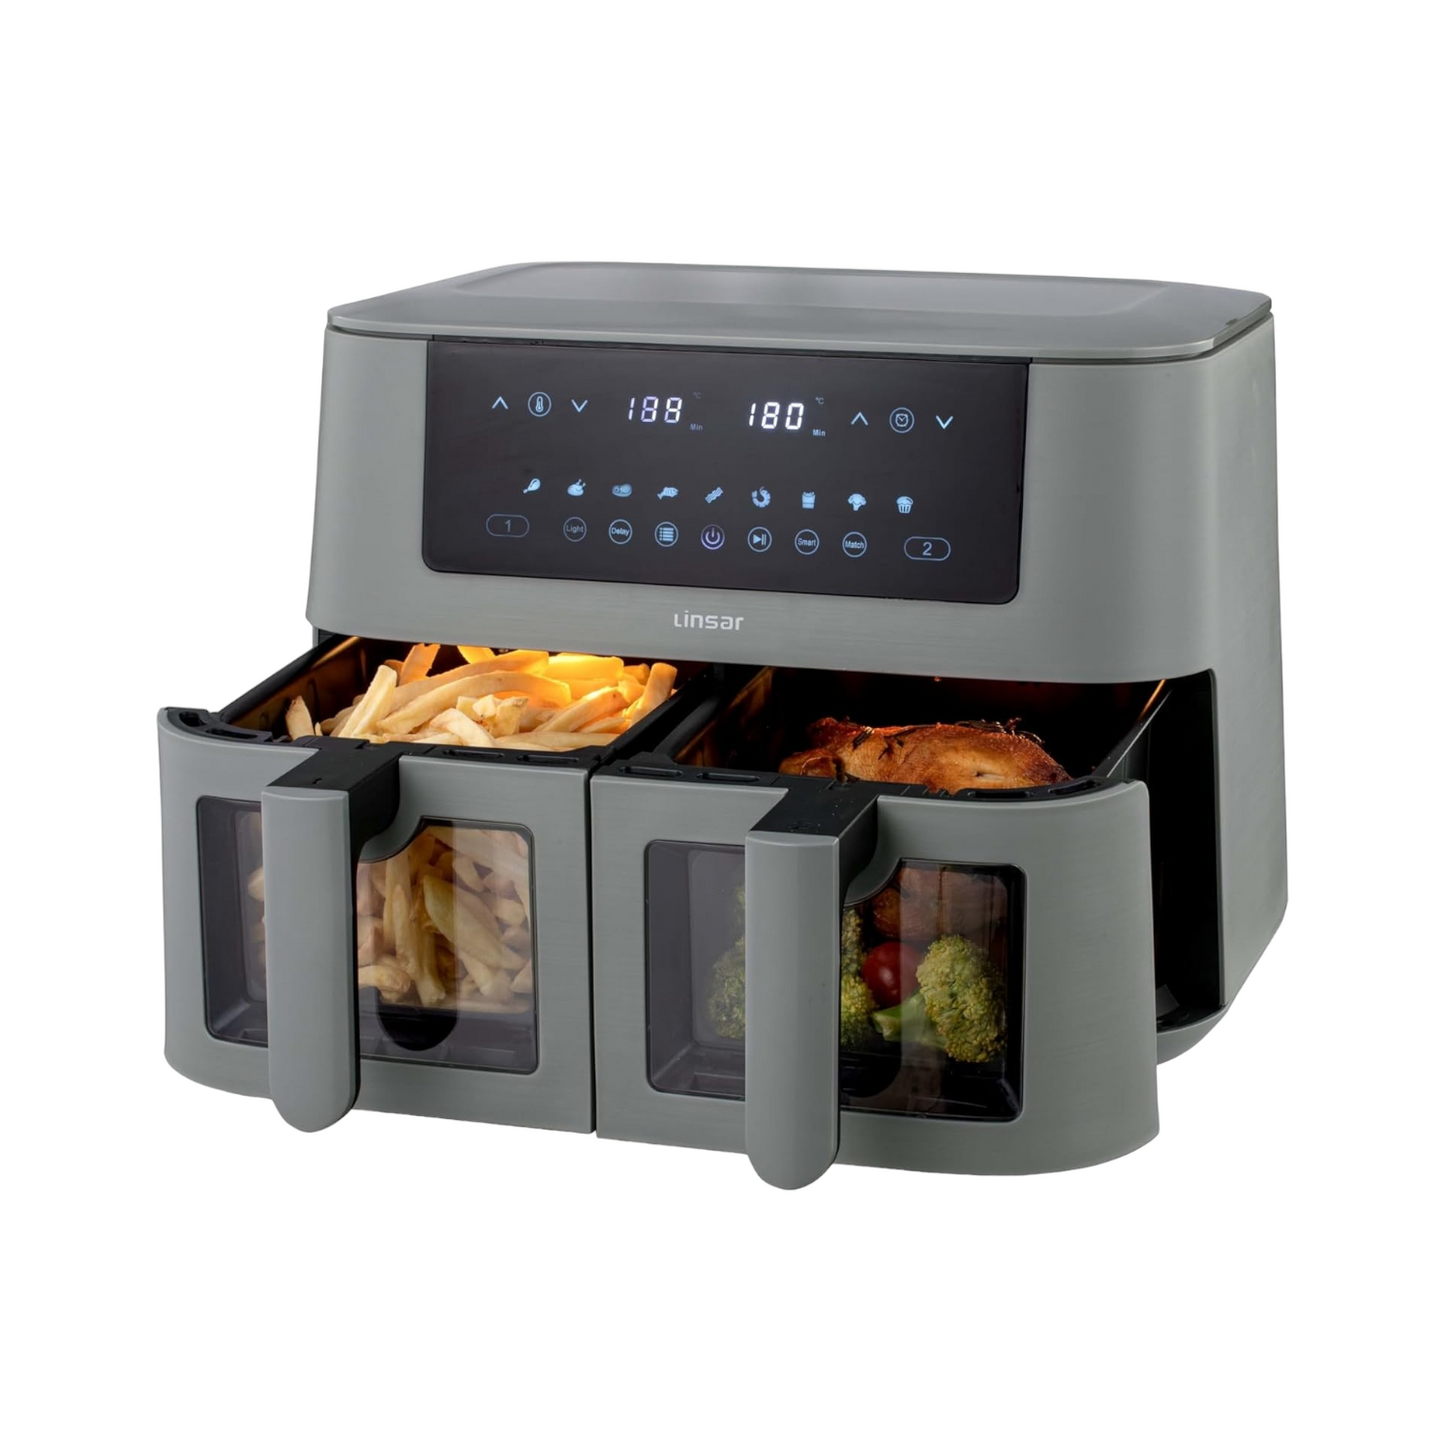 Hot air fryer Dual Zone from Linsar